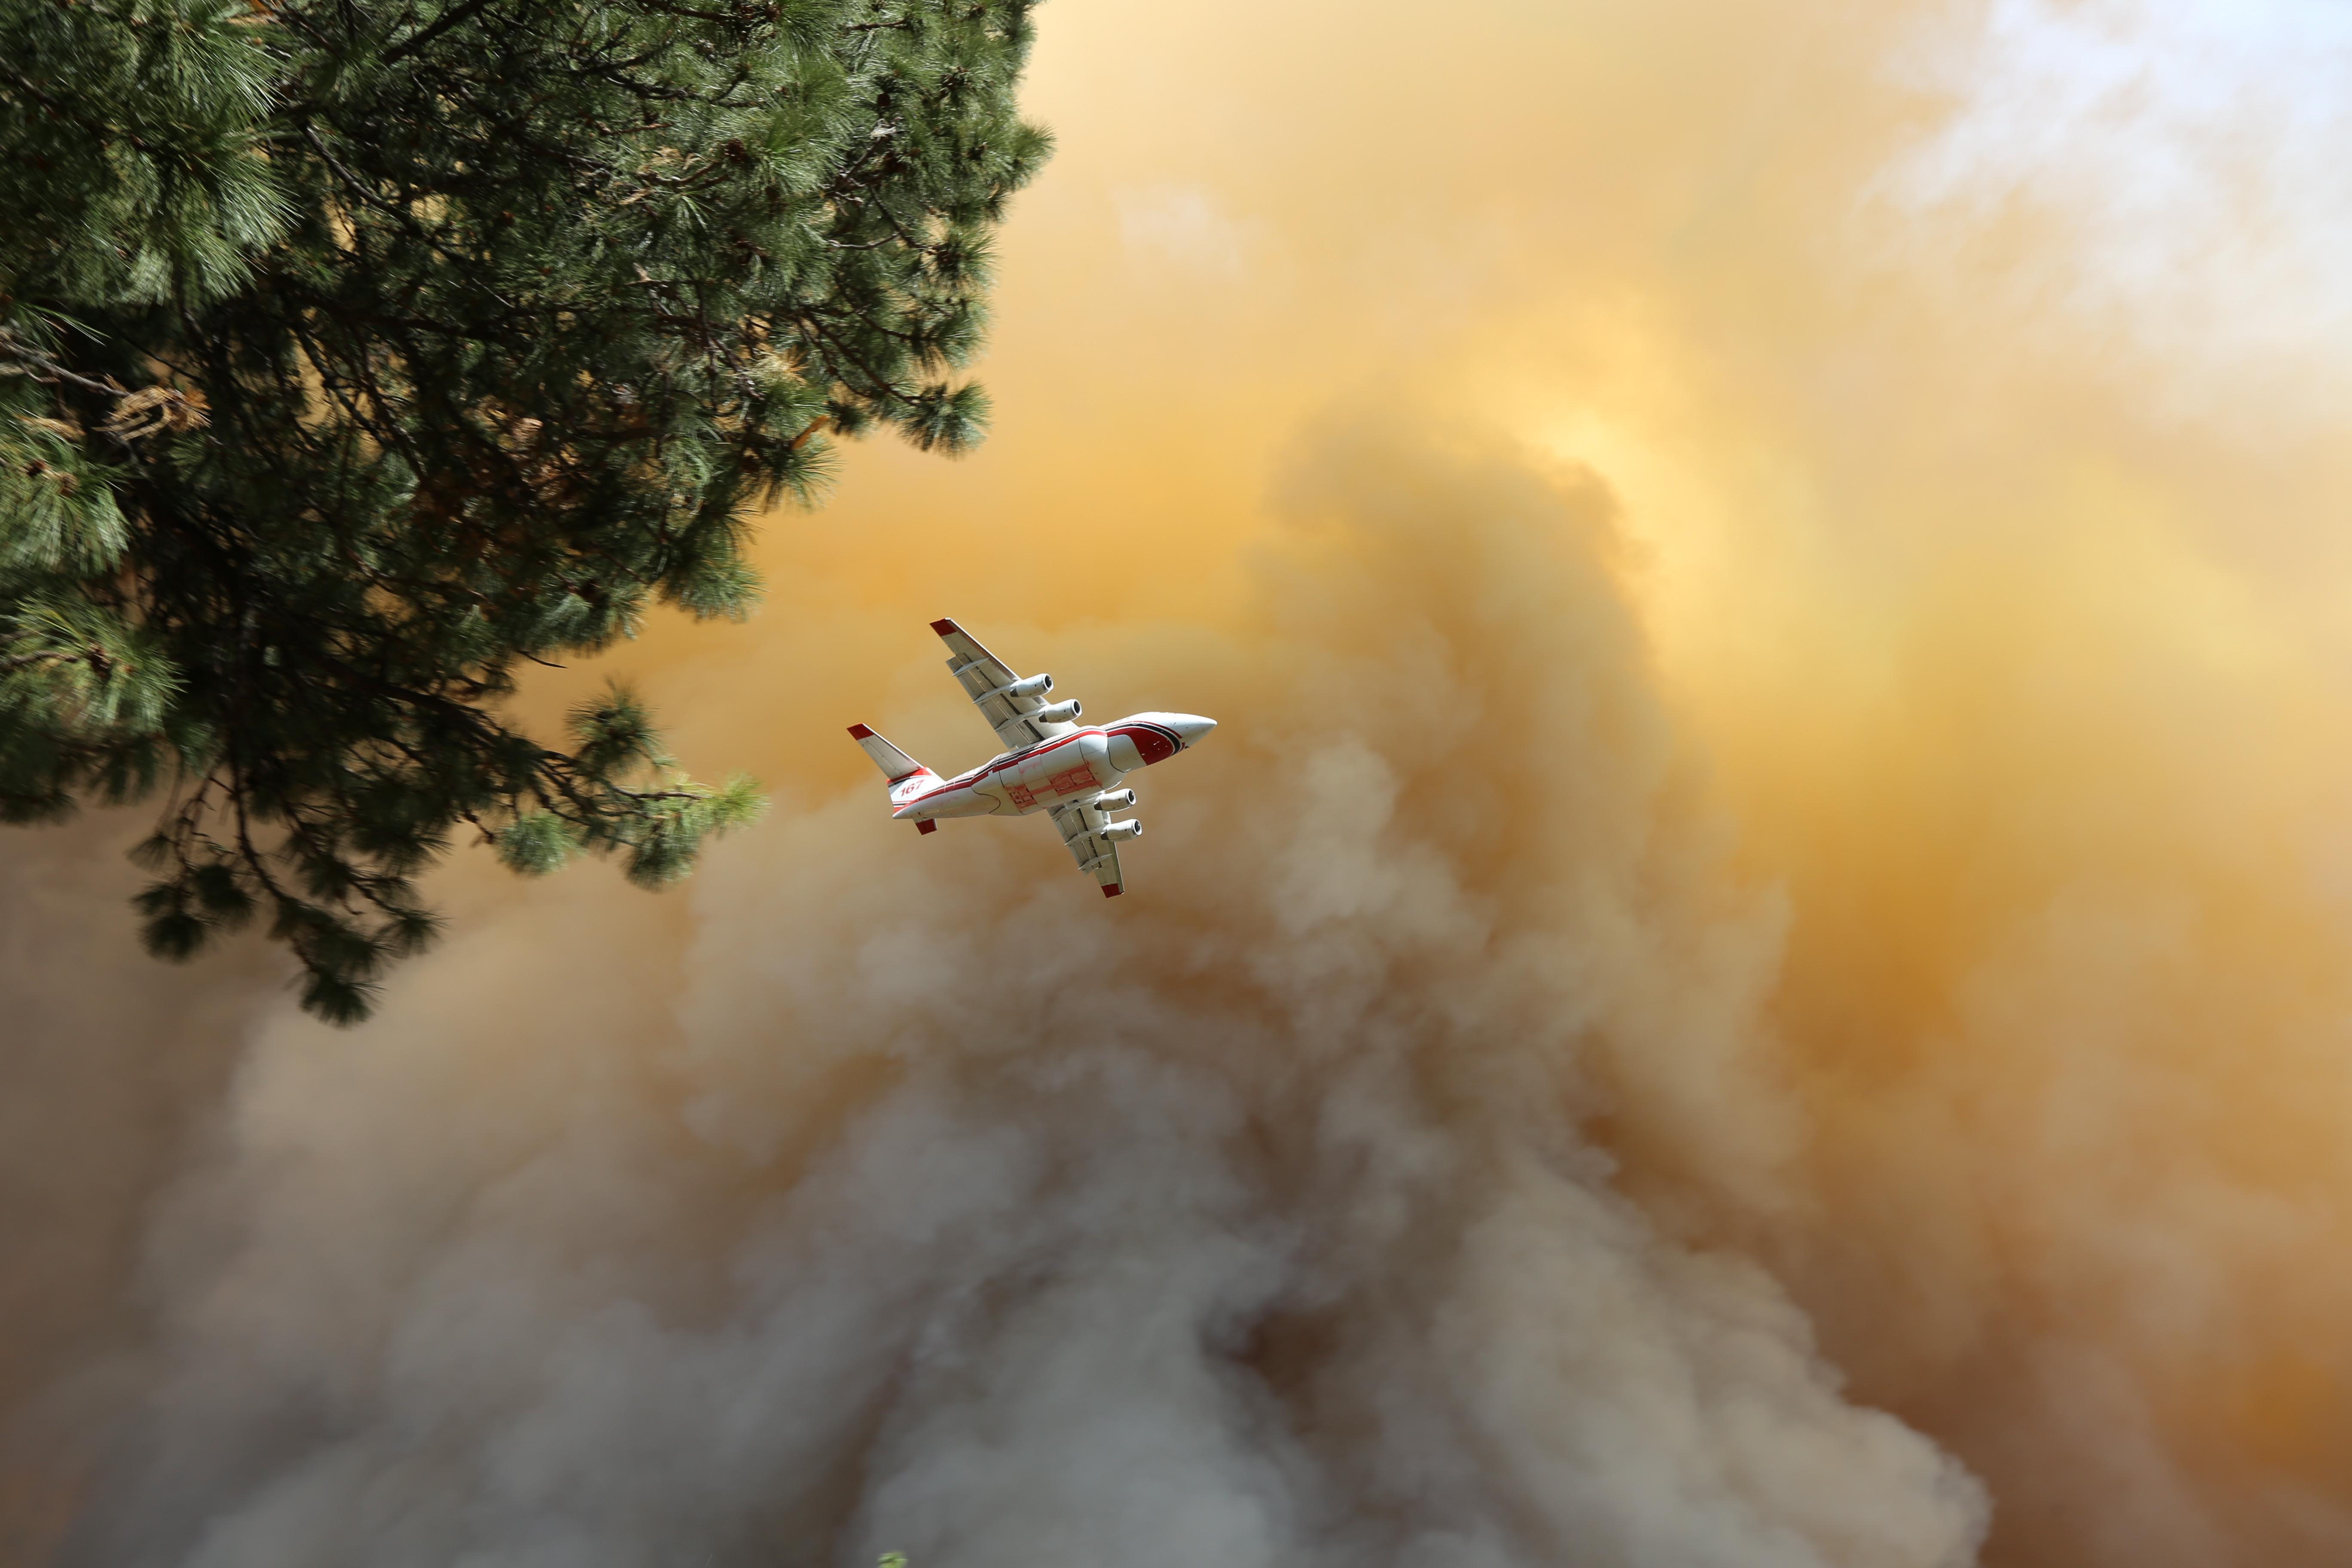 A retardant-dropping air tanker flying in thick smoke from the the spot fire that crossed American River Tuesday afternoon and grew quickly northward toward Foresthill, California.